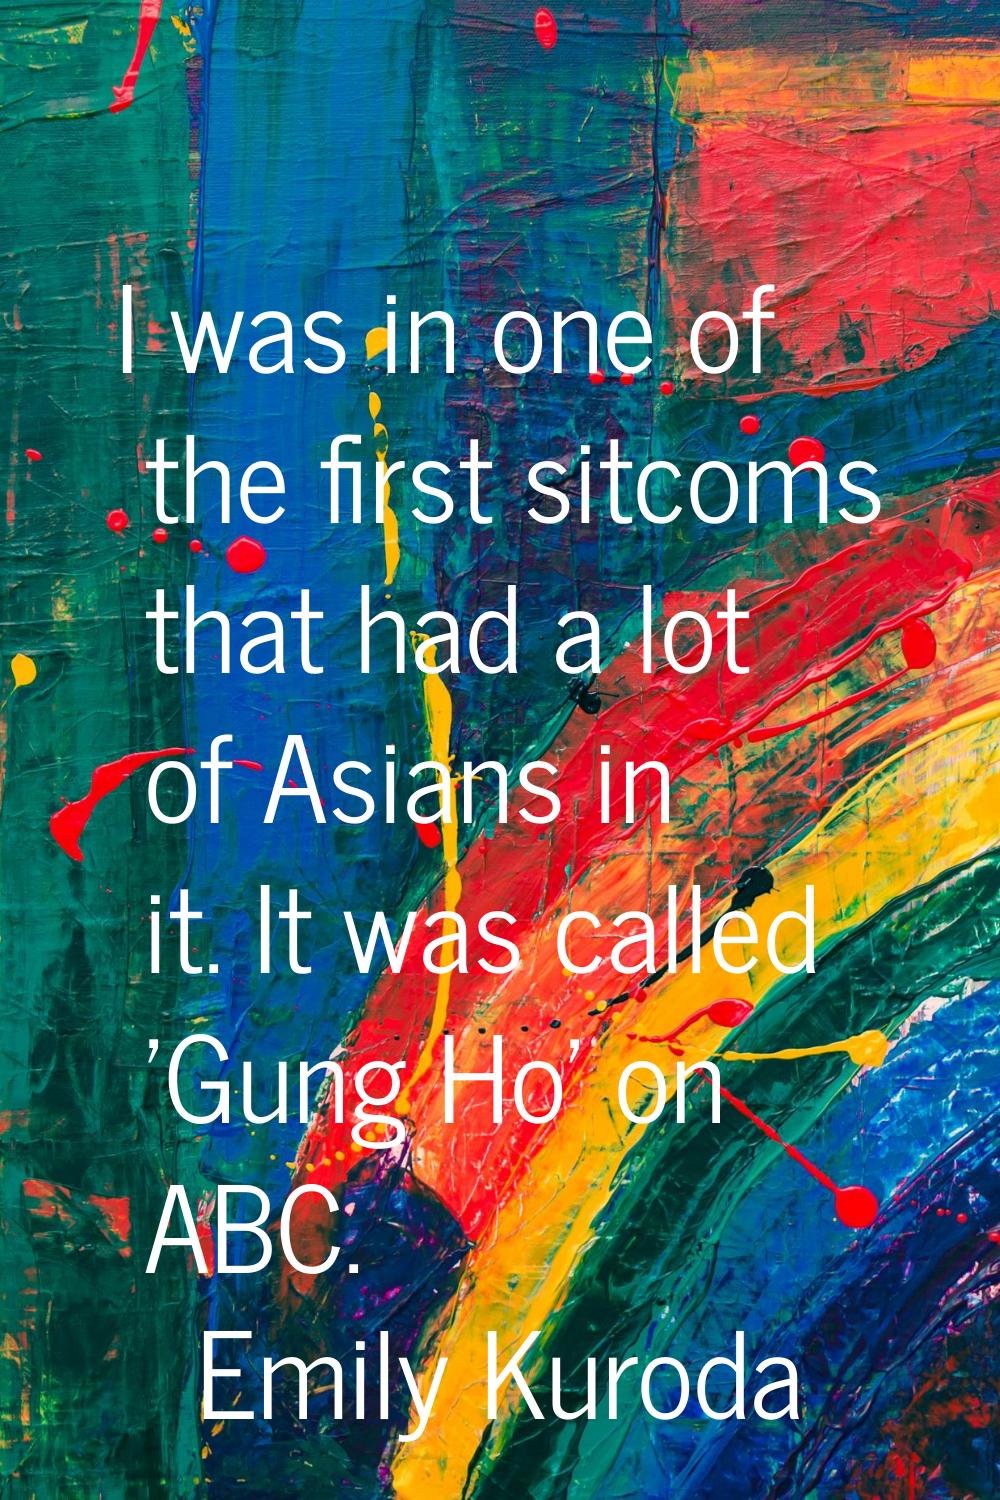 I was in one of the first sitcoms that had a lot of Asians in it. It was called 'Gung Ho' on ABC.